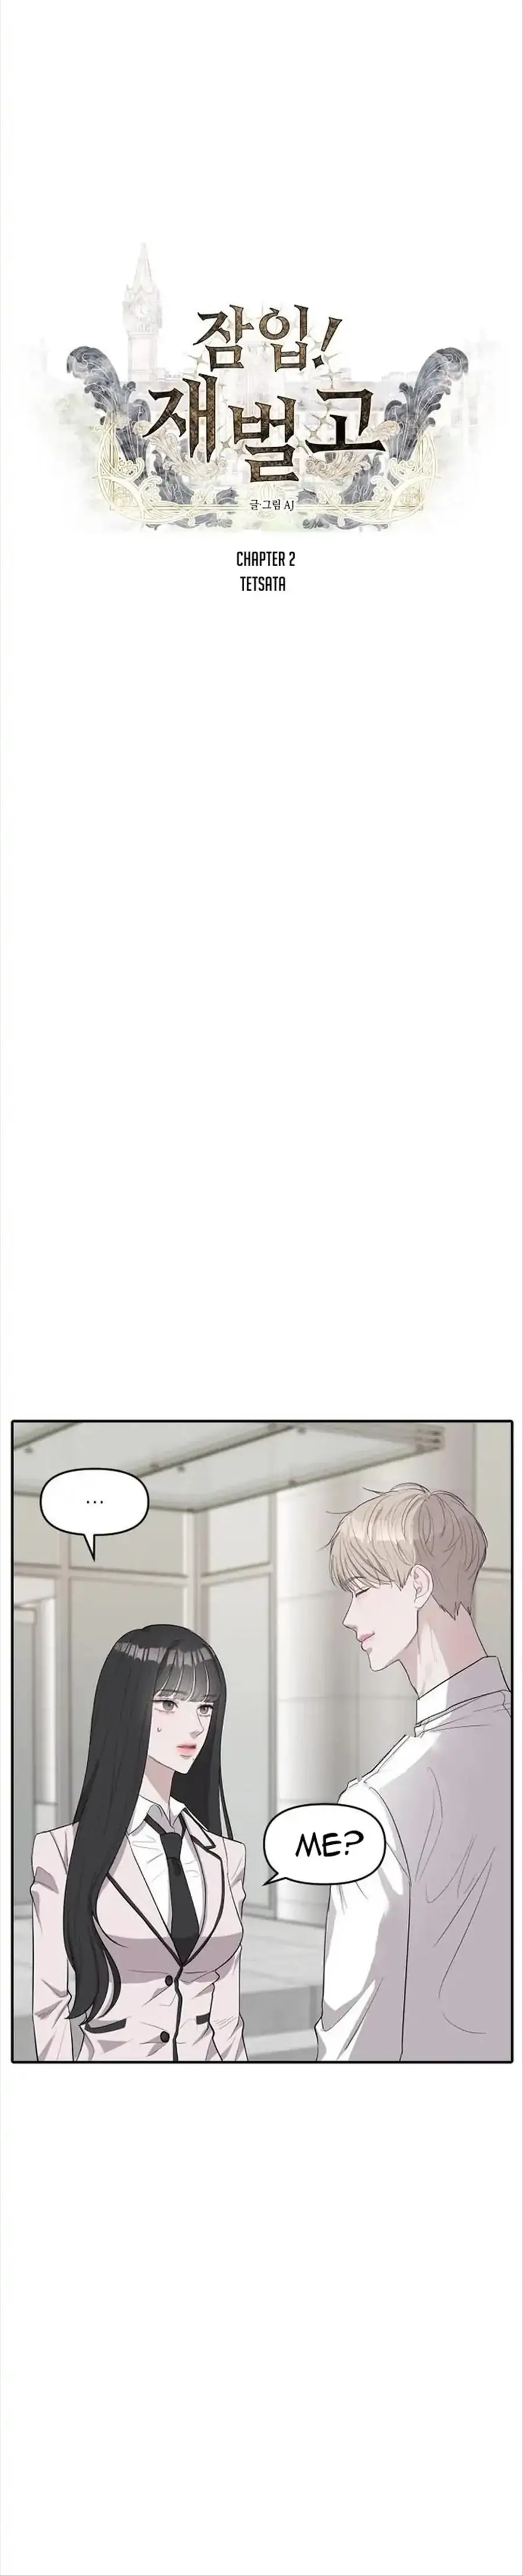 Undercover! Chaebol High School Chapter 2 - page 4